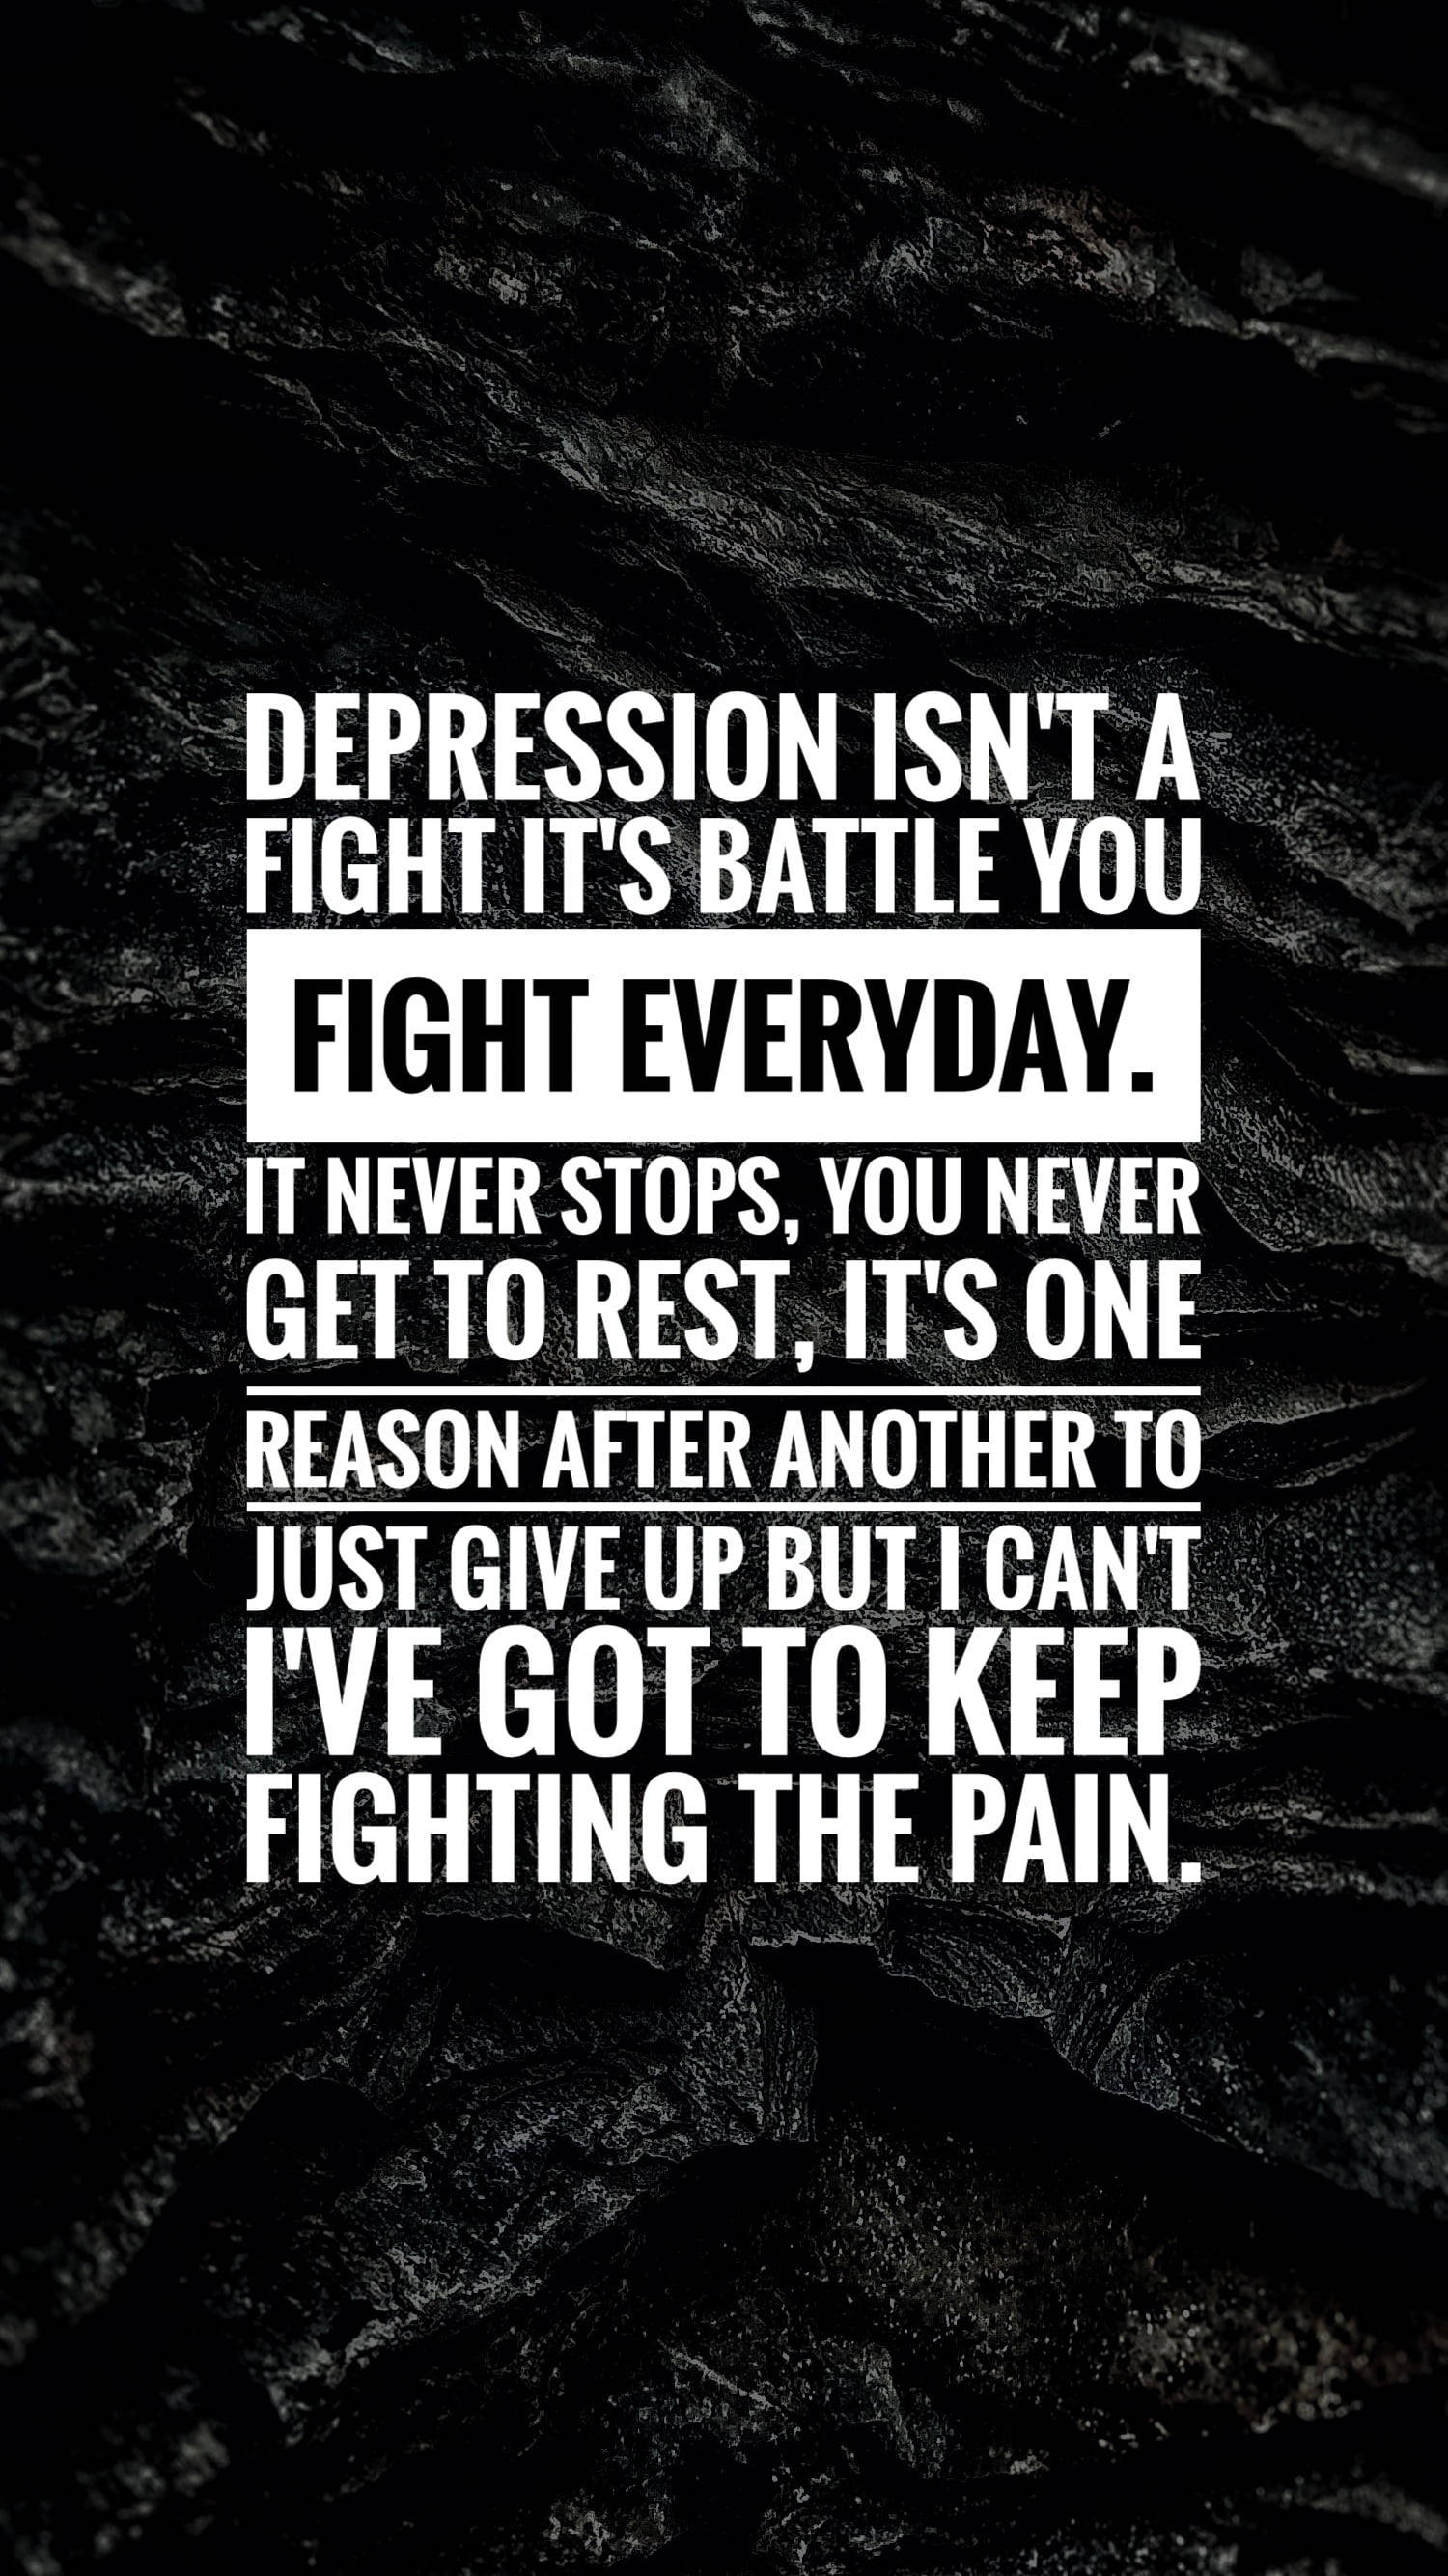 Depression isn't a fight it is battle you - Depressing, depression